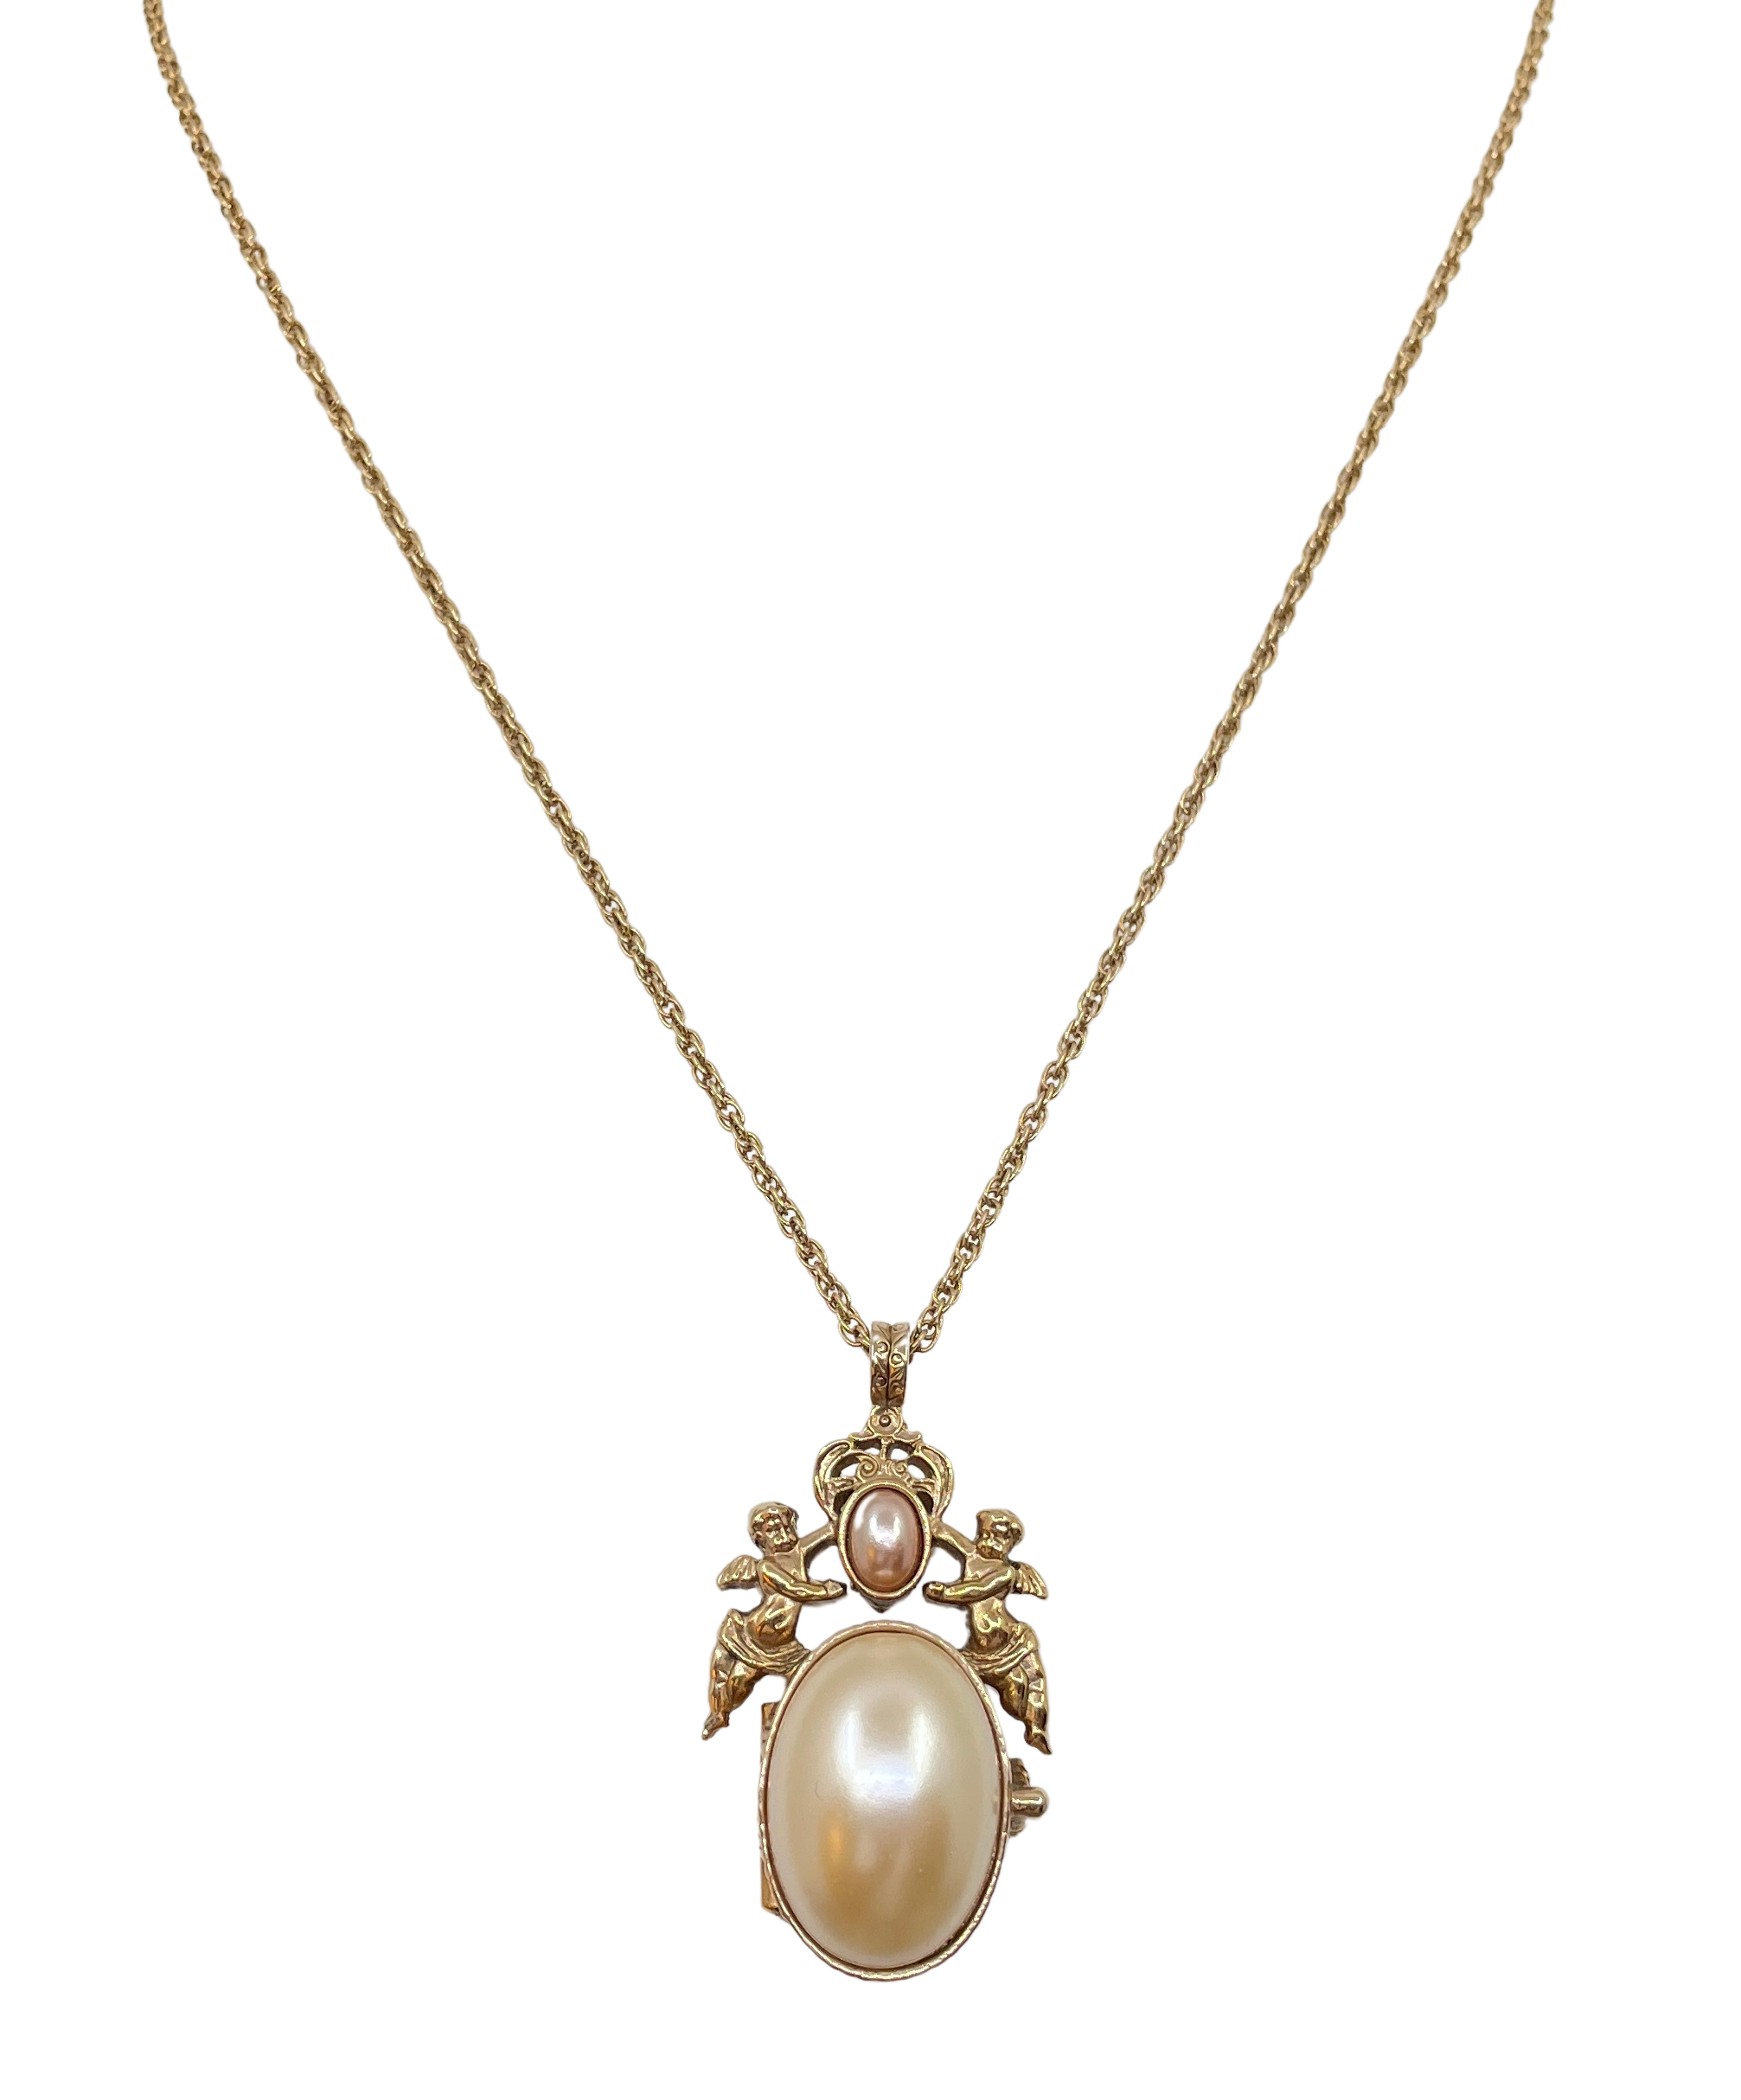 Large Pearl & Angel Pendant Necklace